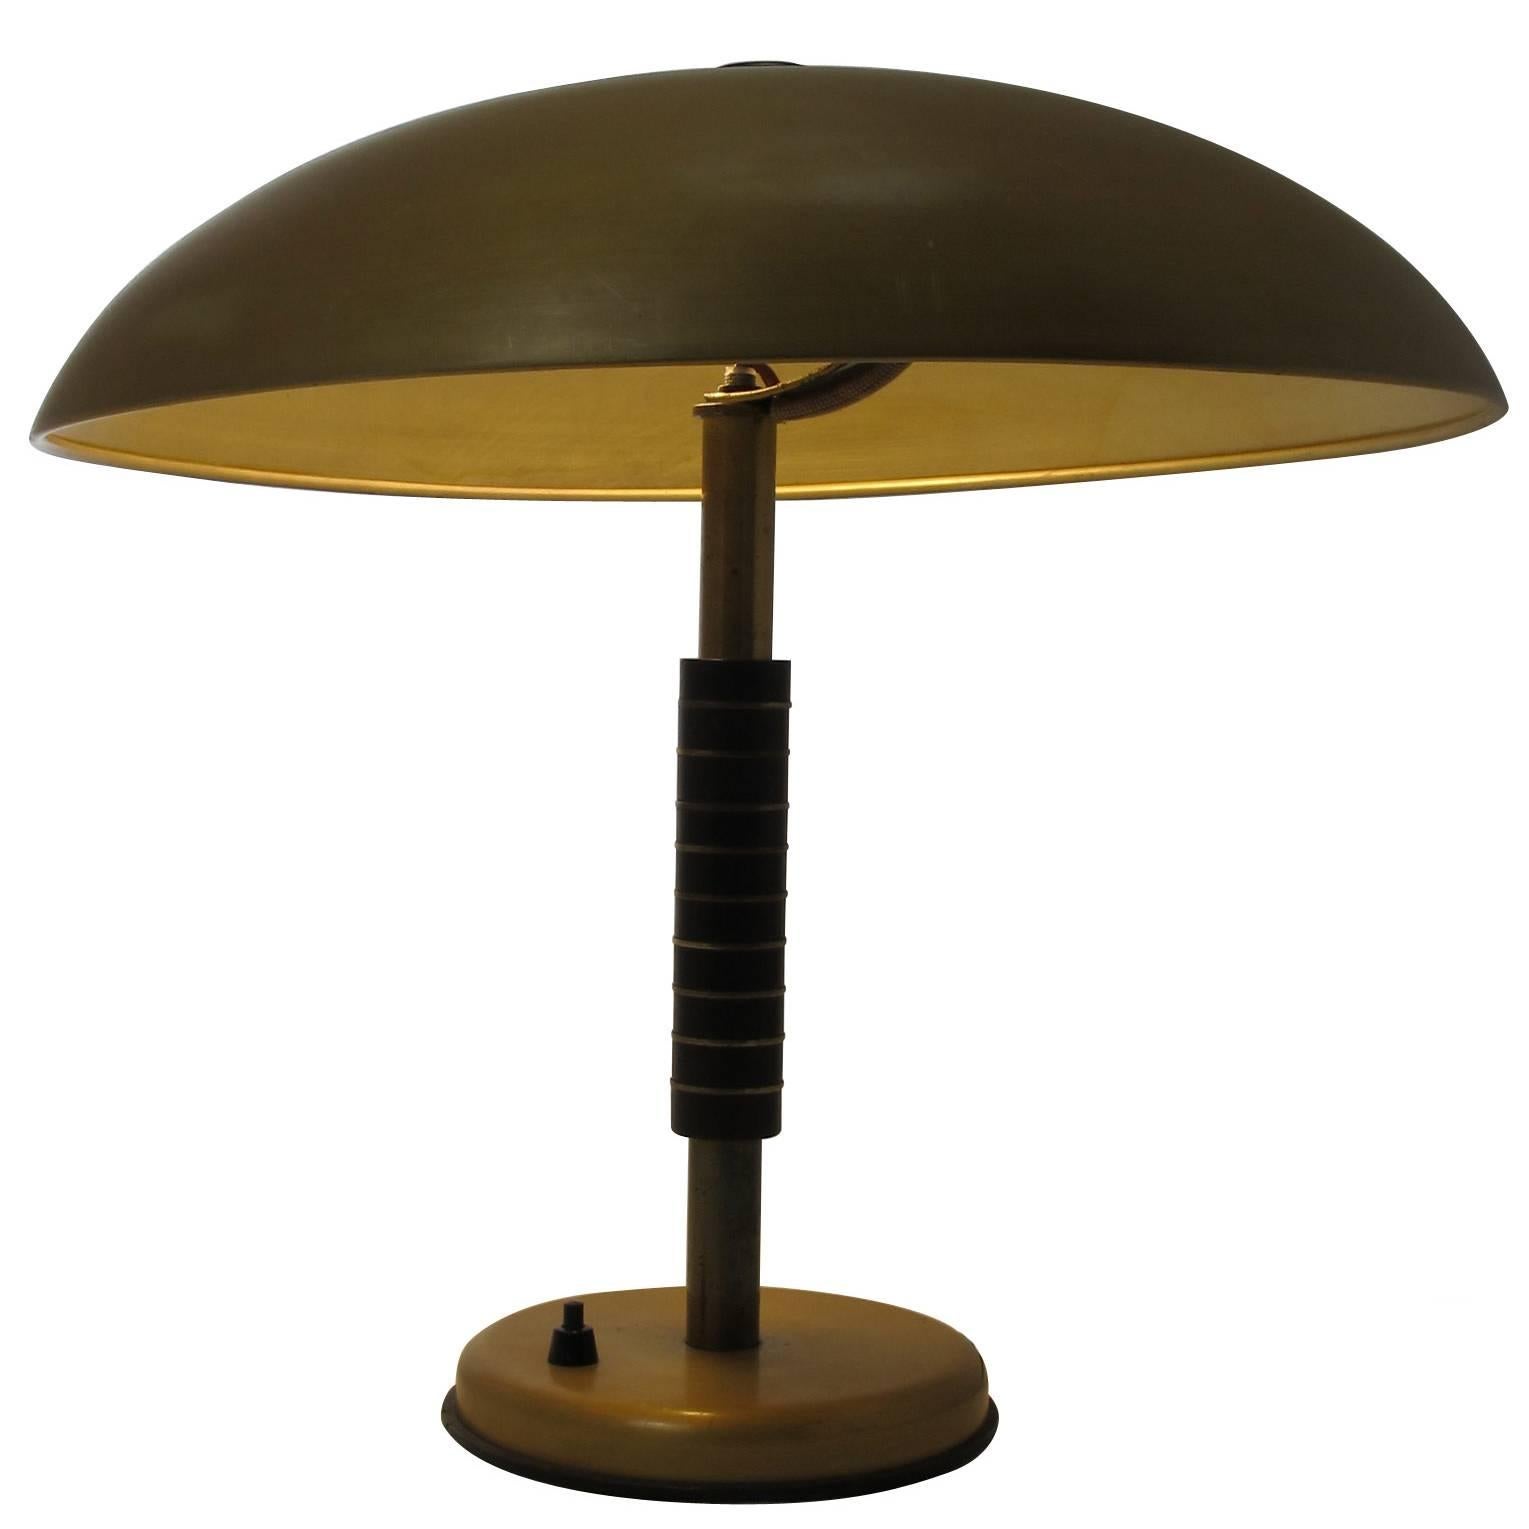 This Art Deco table lamp was produced by SbF in 1944. It features a gold lacquered metal shade with a metal and bakelite stand. This lamp has been rewired.